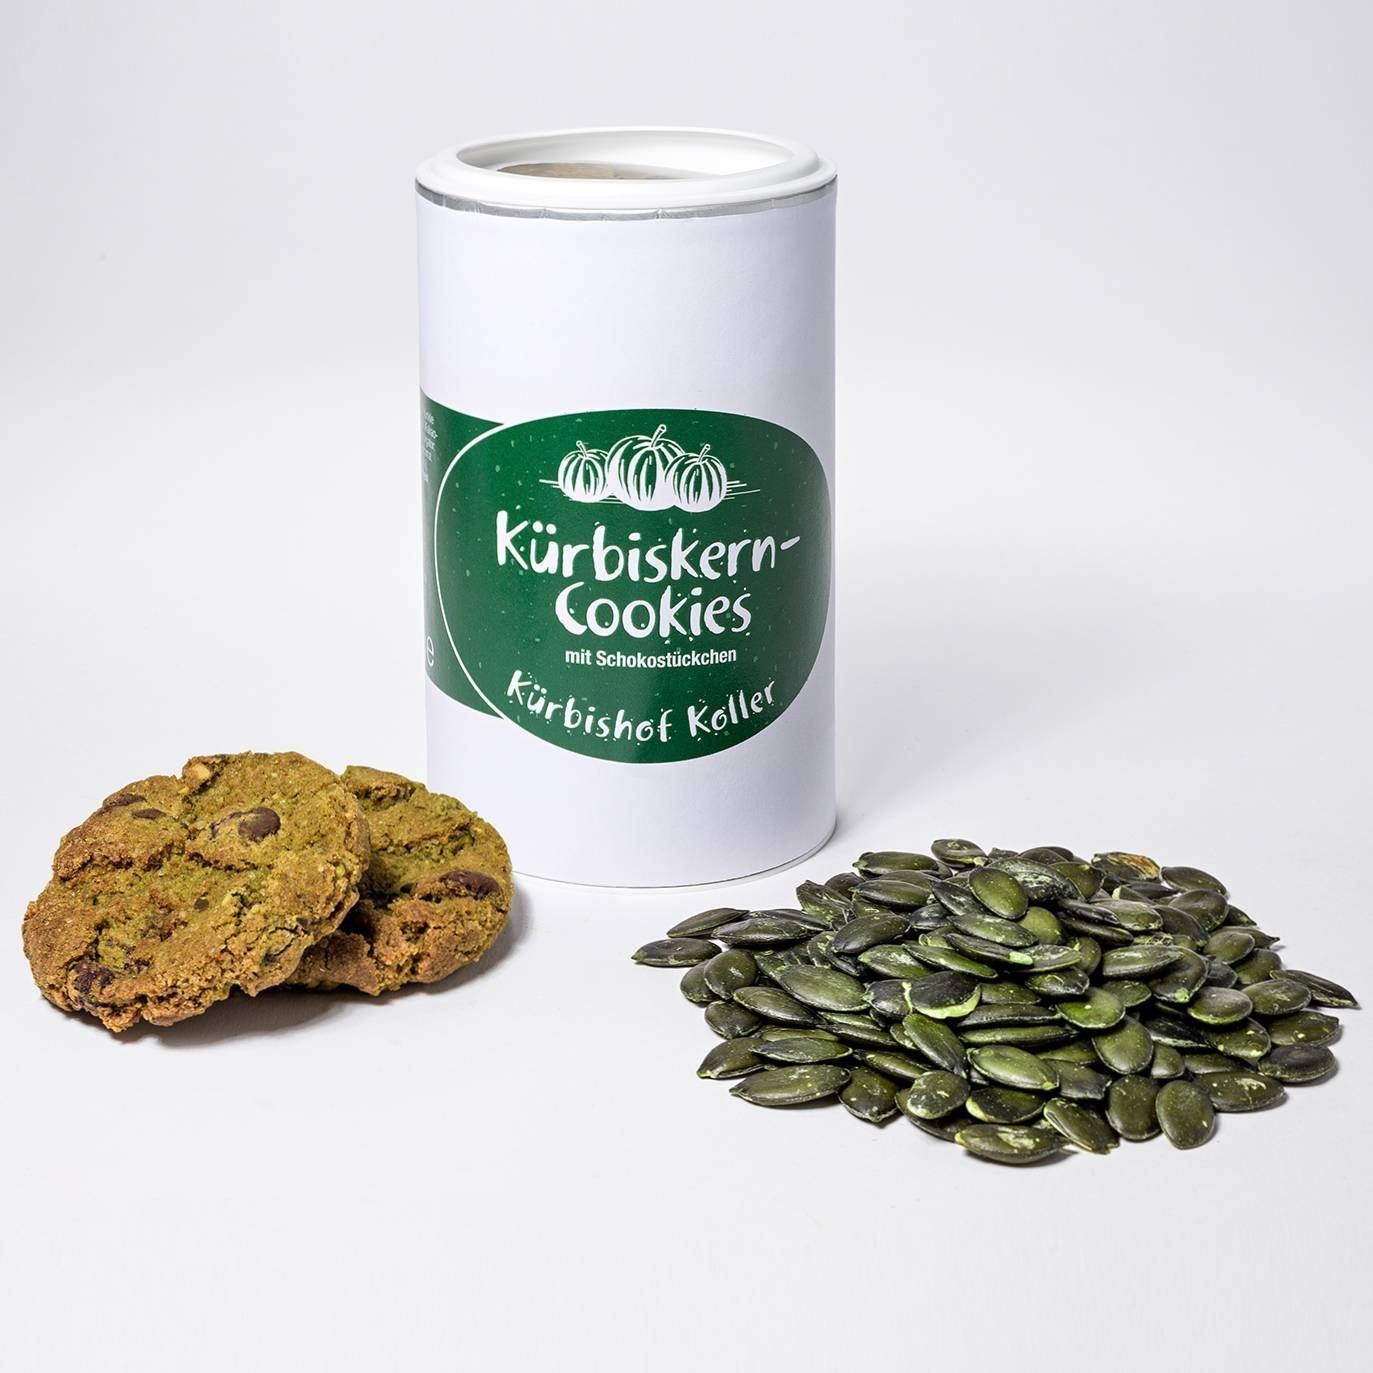 Pumpkin Seed Cookies with Chocolate Chips in Equatorial Guinea